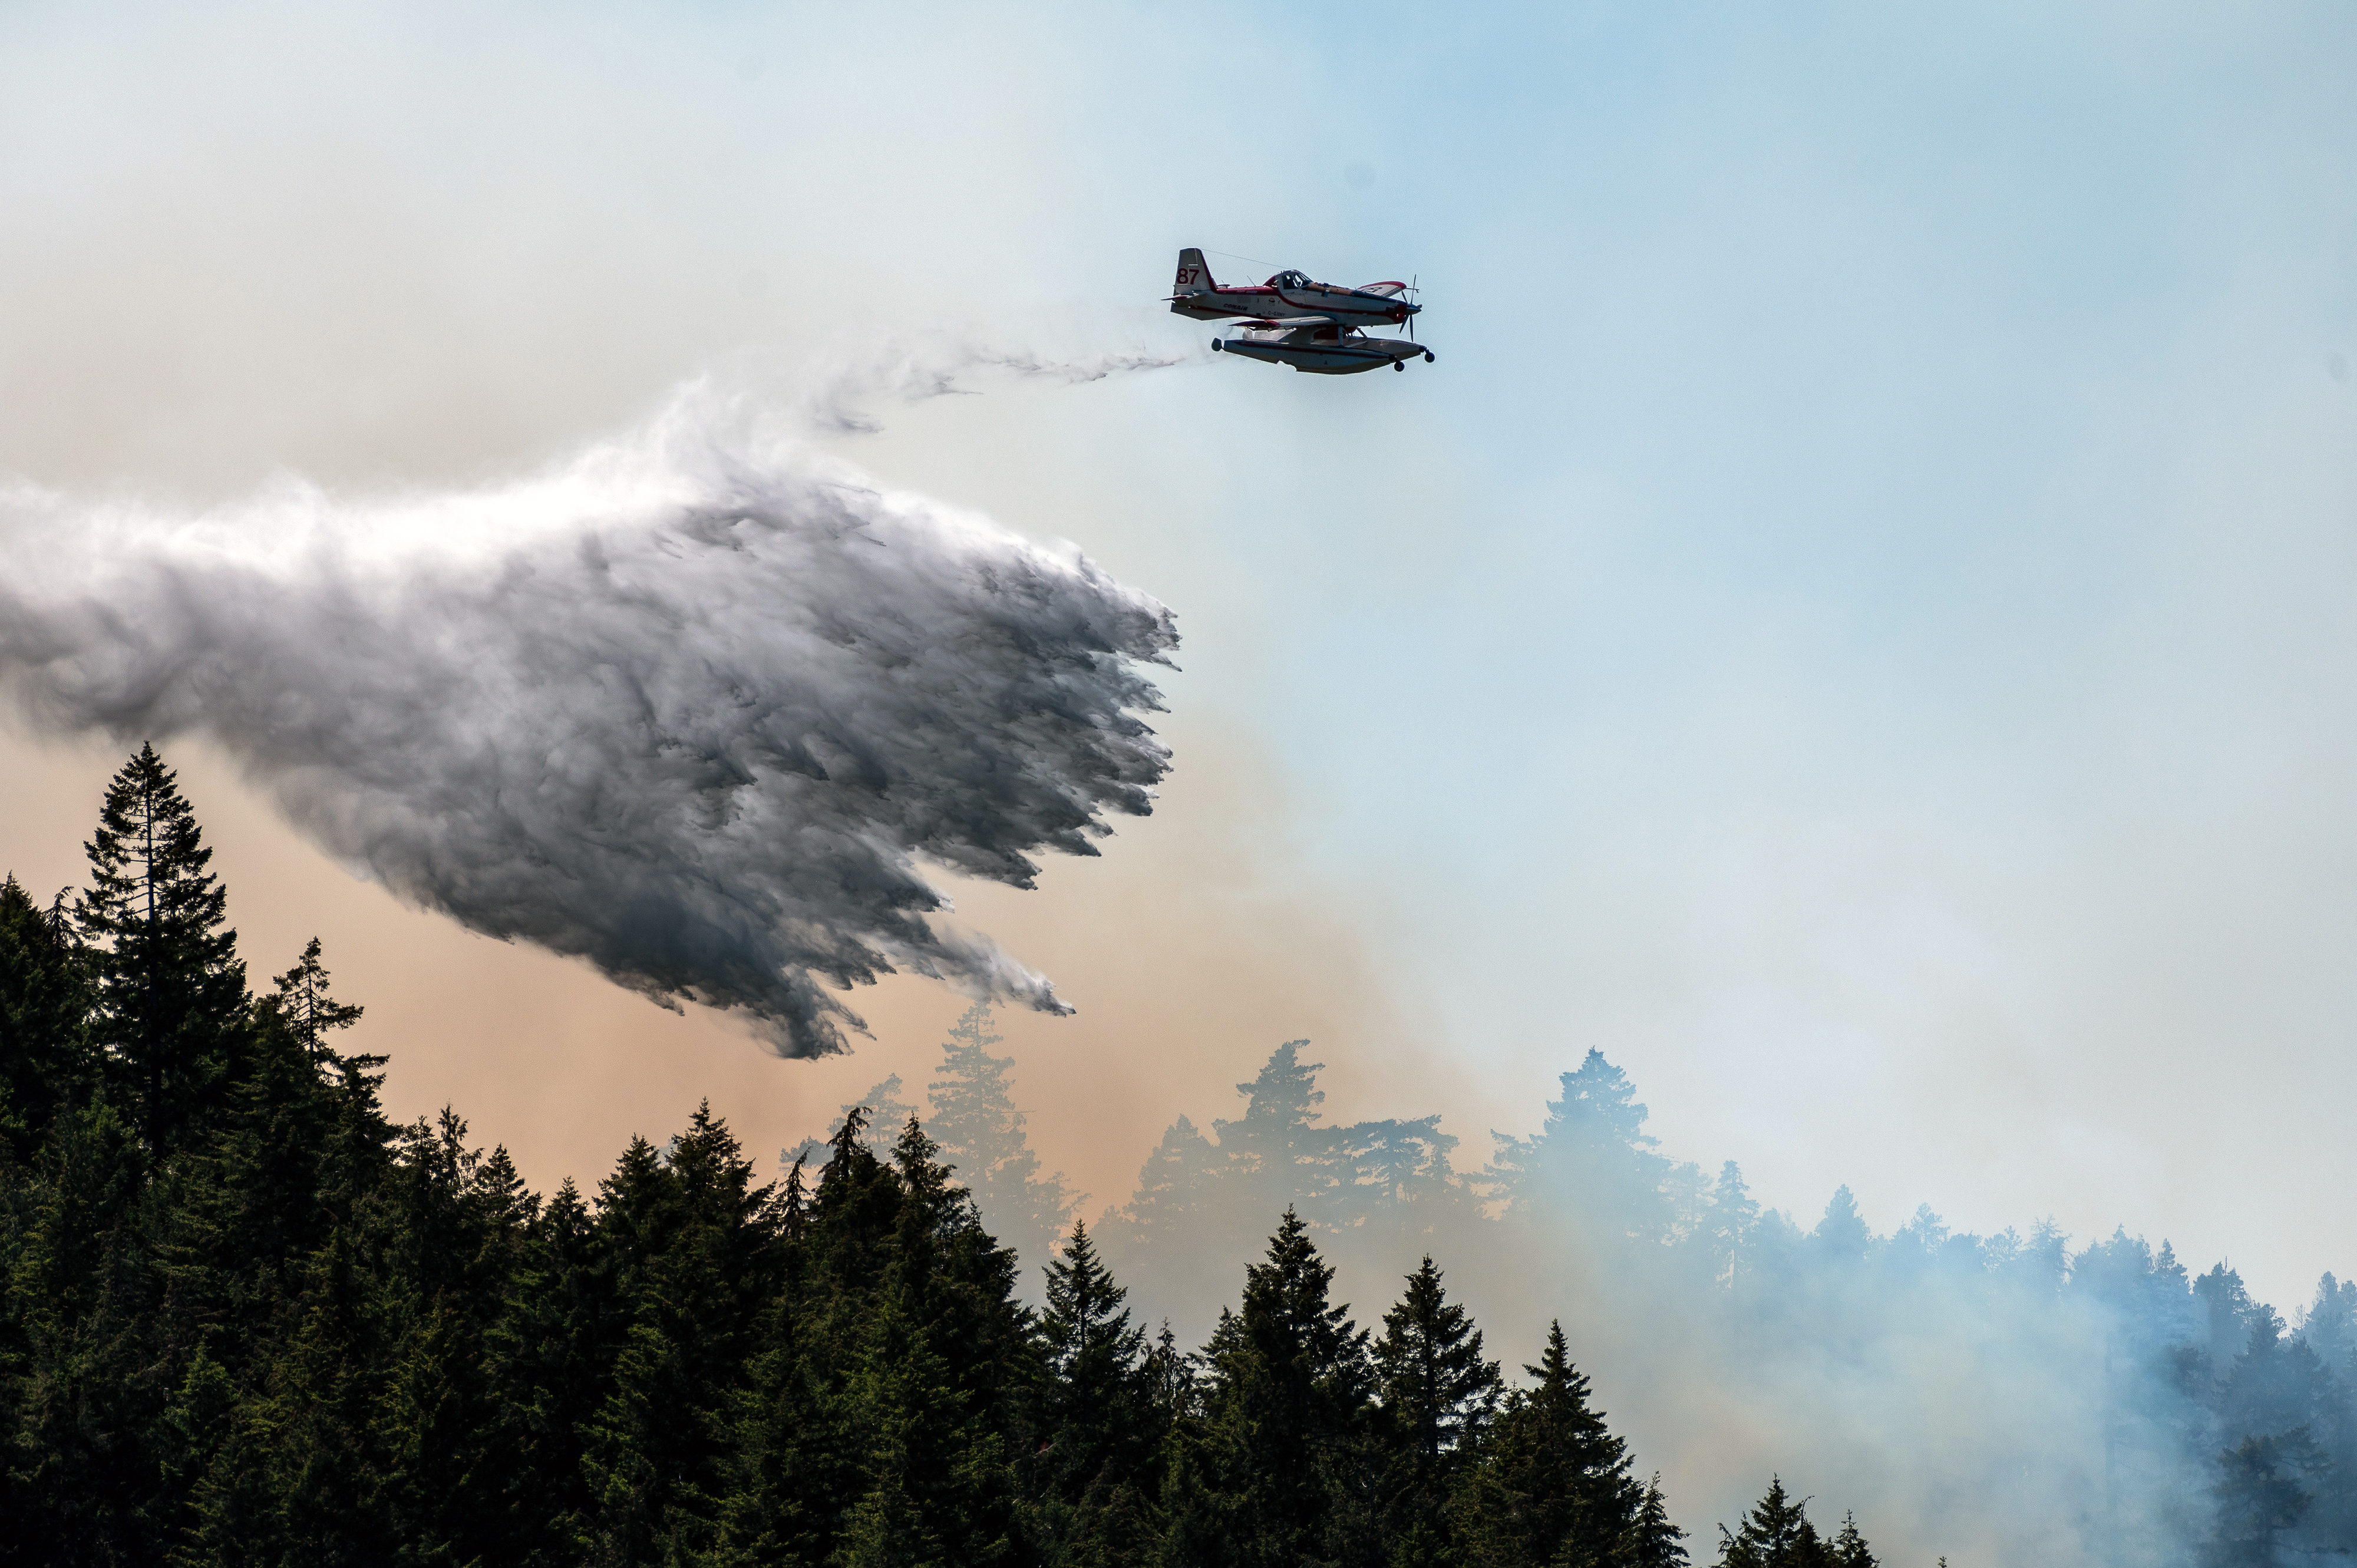 A plane drops a large cloud of water onto pine trees from above, and smoke rises into the air.